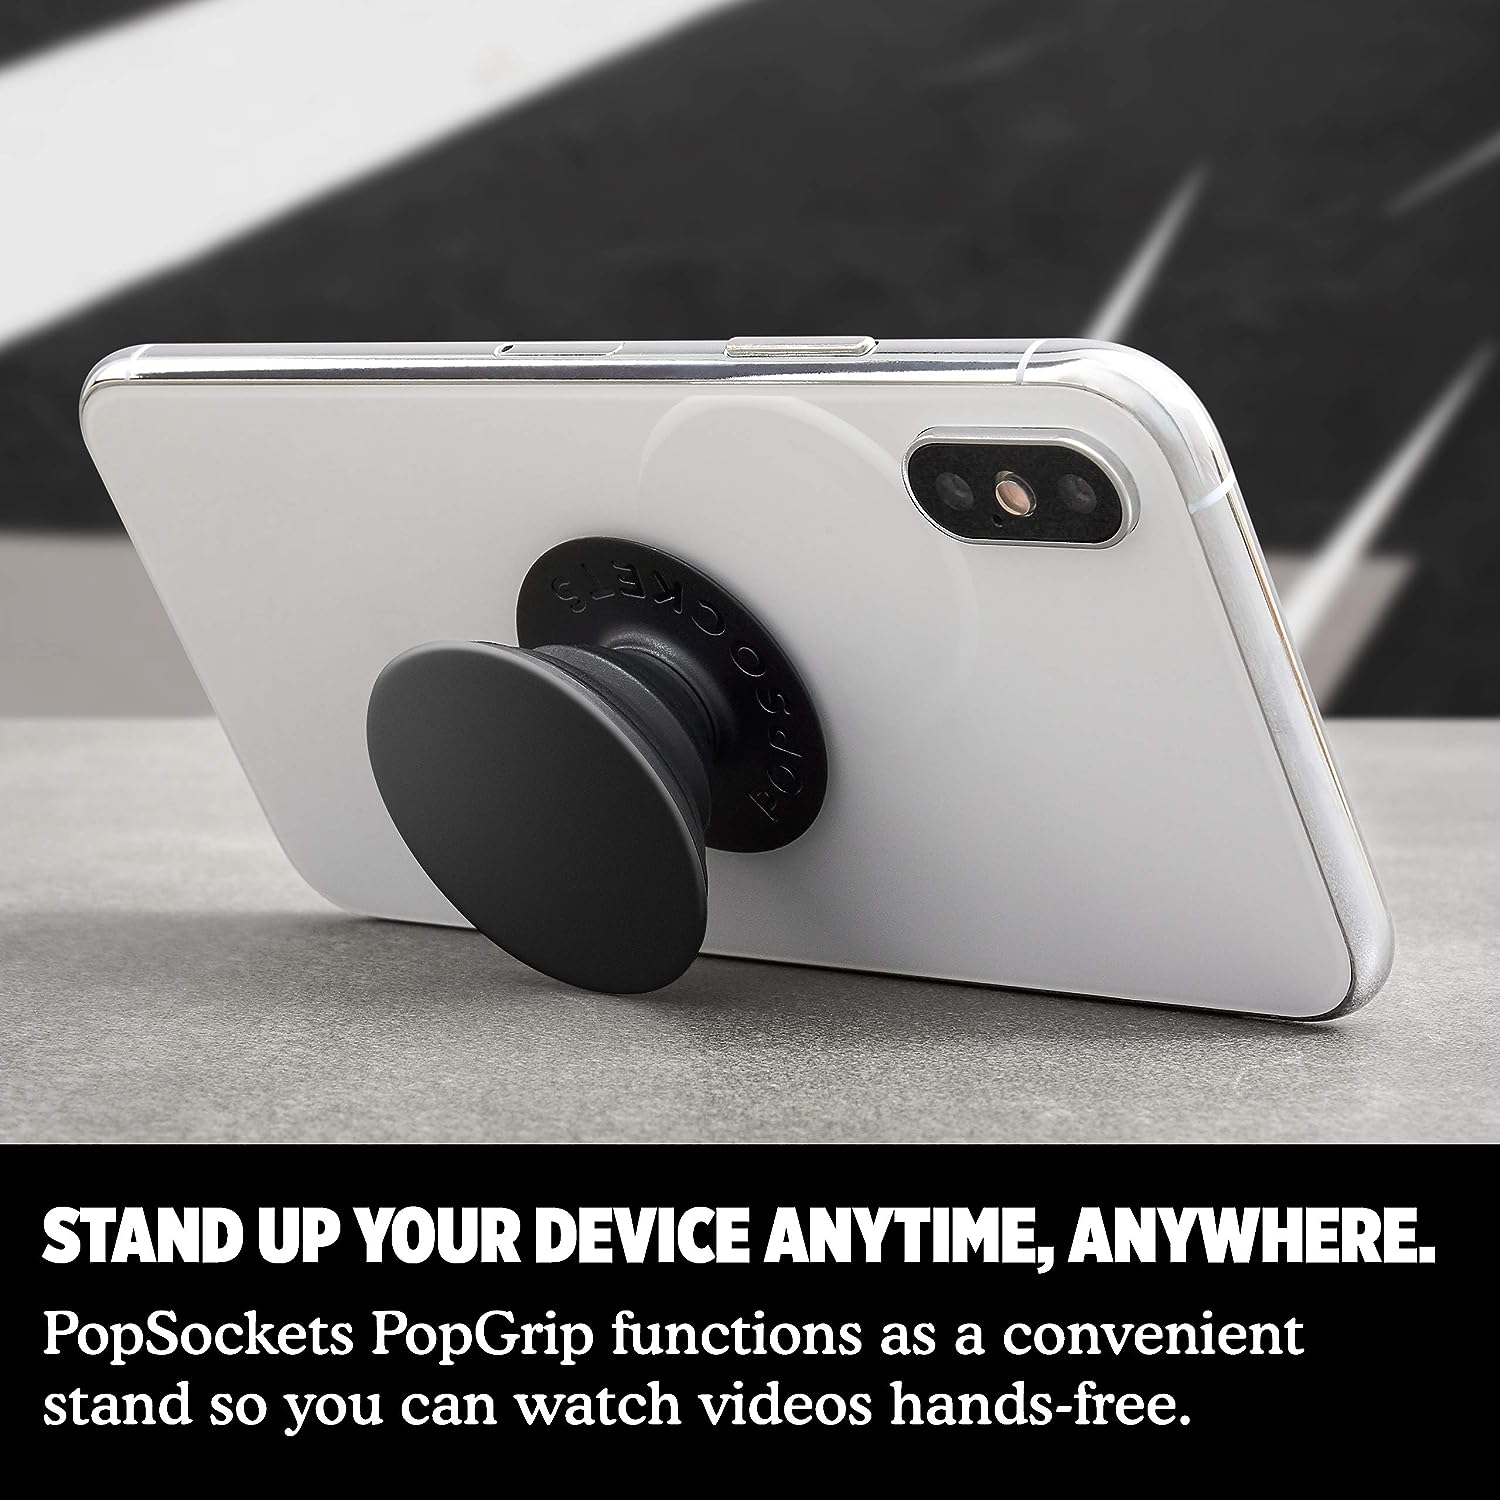 PopSockets Adhesive Phone Grip with Expandable Kickstand and swappable top - PopGrip Black - image 4 of 5